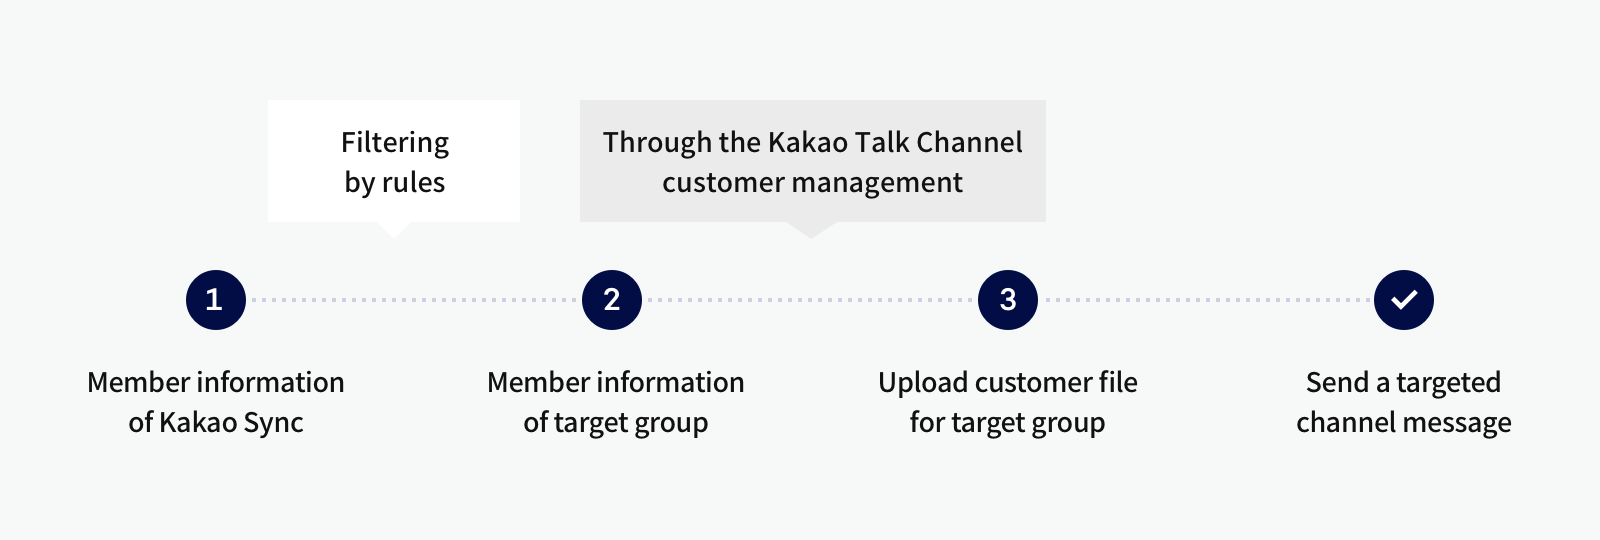 Process of sending a targeted message using Kakao Talk Channel customer management